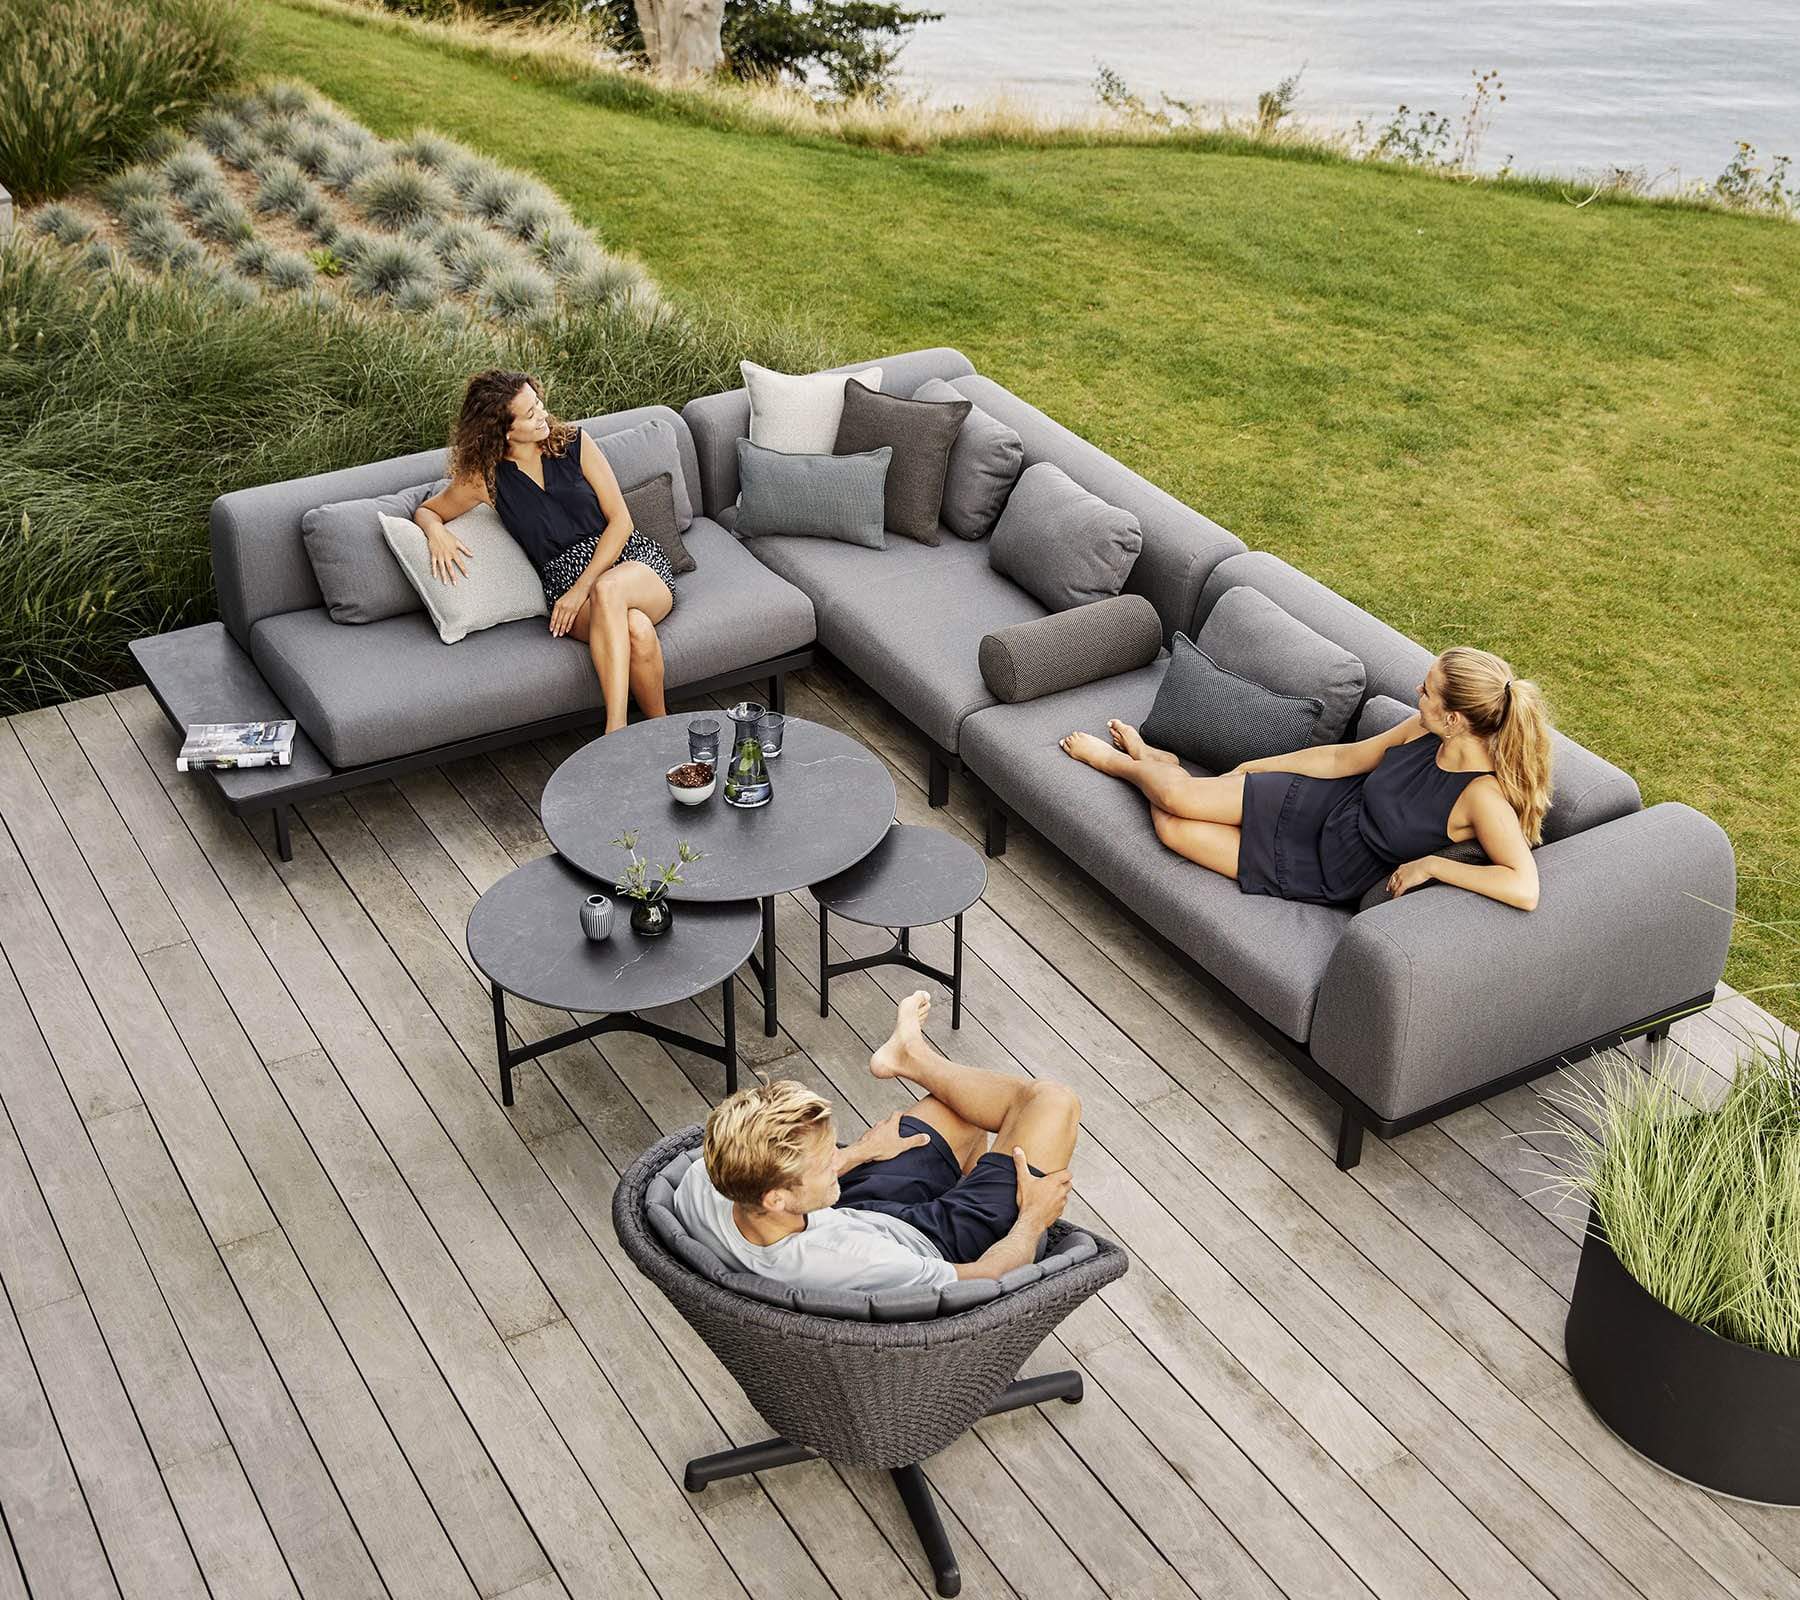 Boxhill's Space light grey outdoor sectional sofa with 3 black round table and grey outdoor lounge chair set on wooden patio